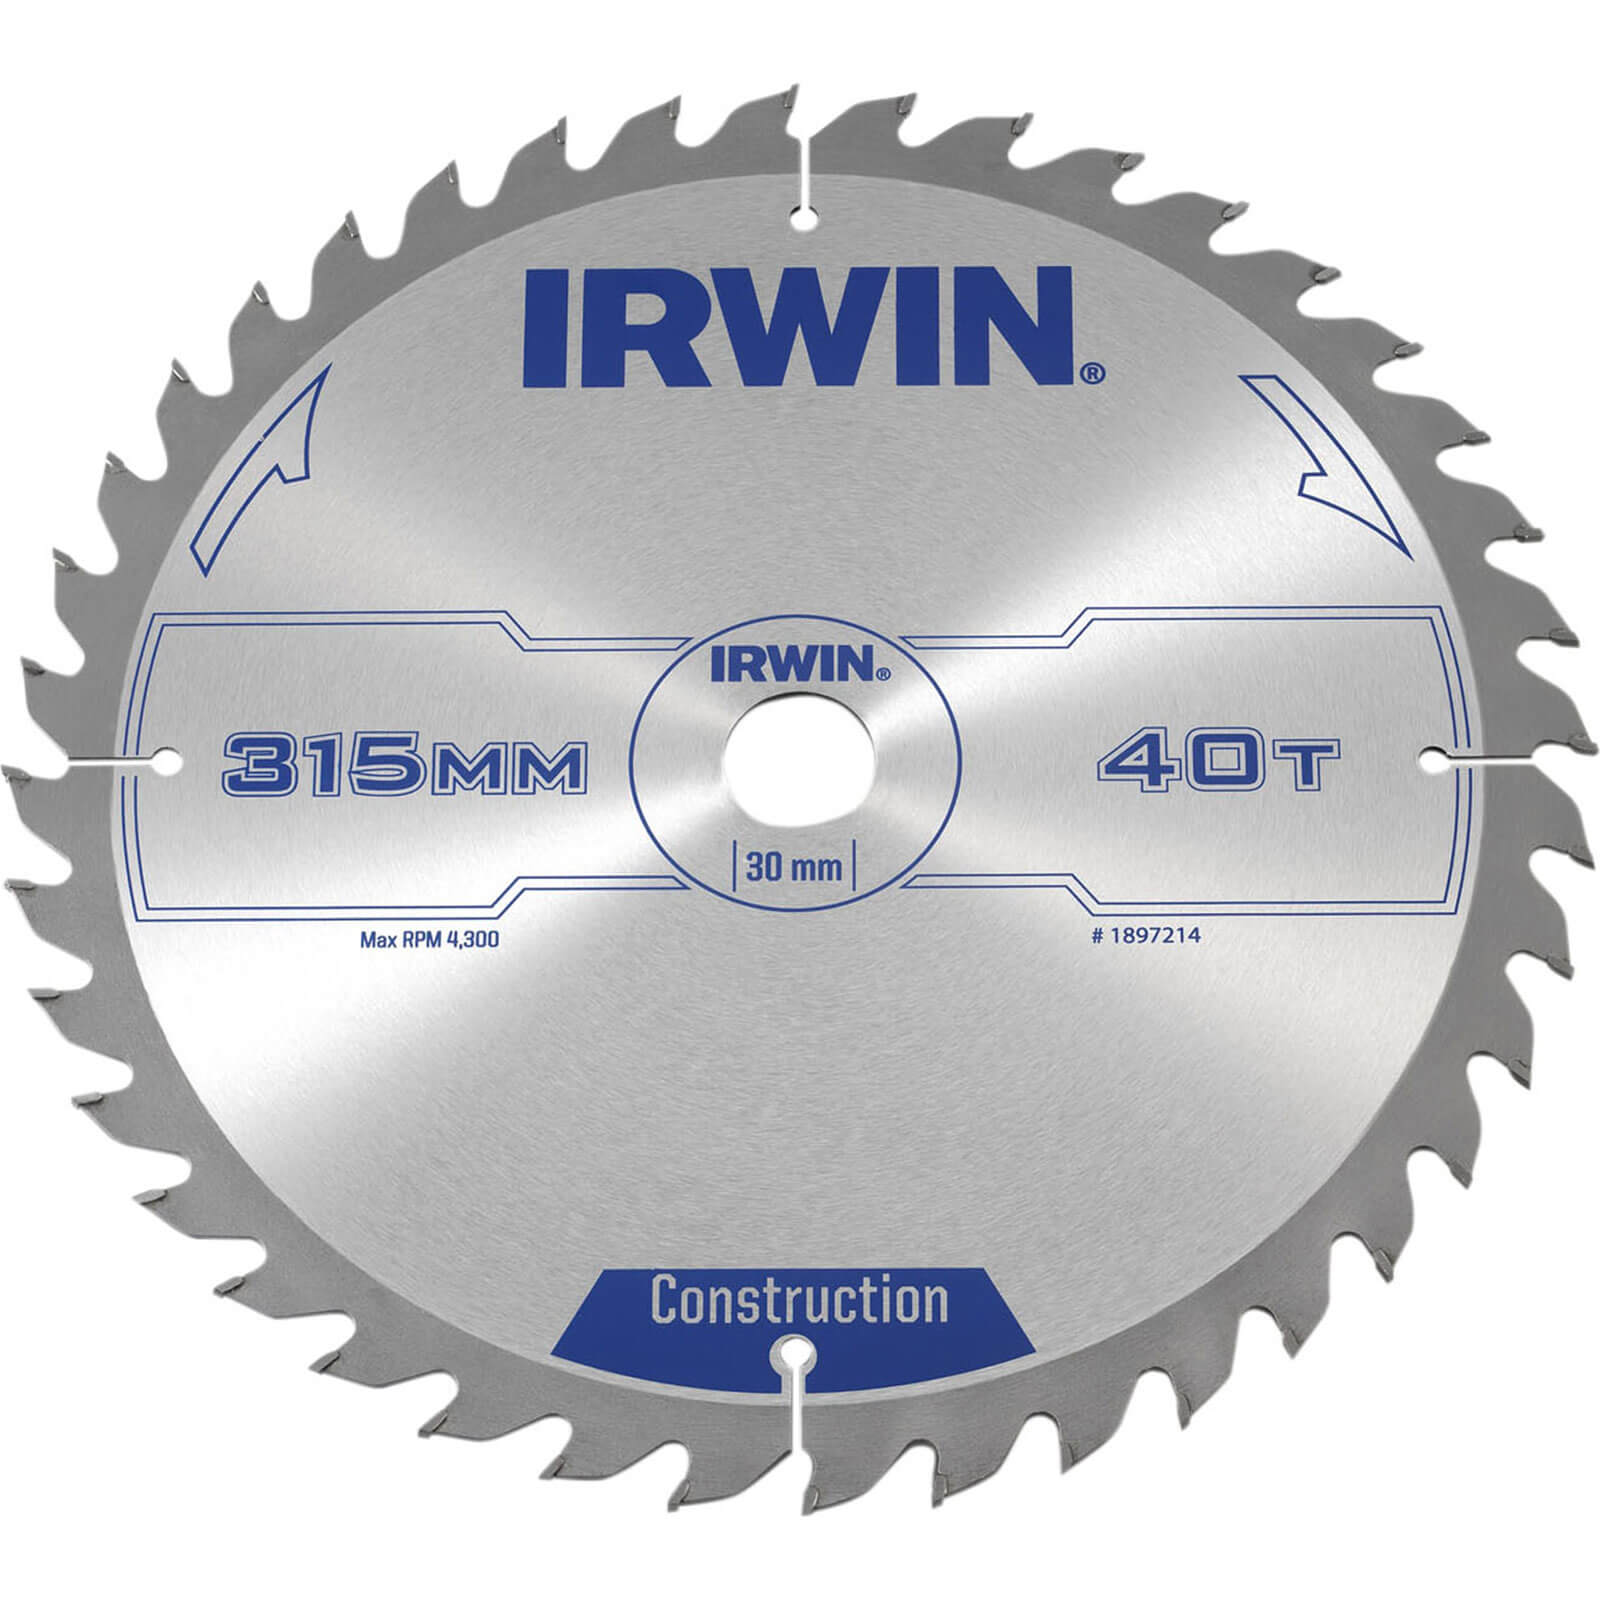 Photo of Irwin Atb Construction Circular Saw Blade 315mm 40t 30mm